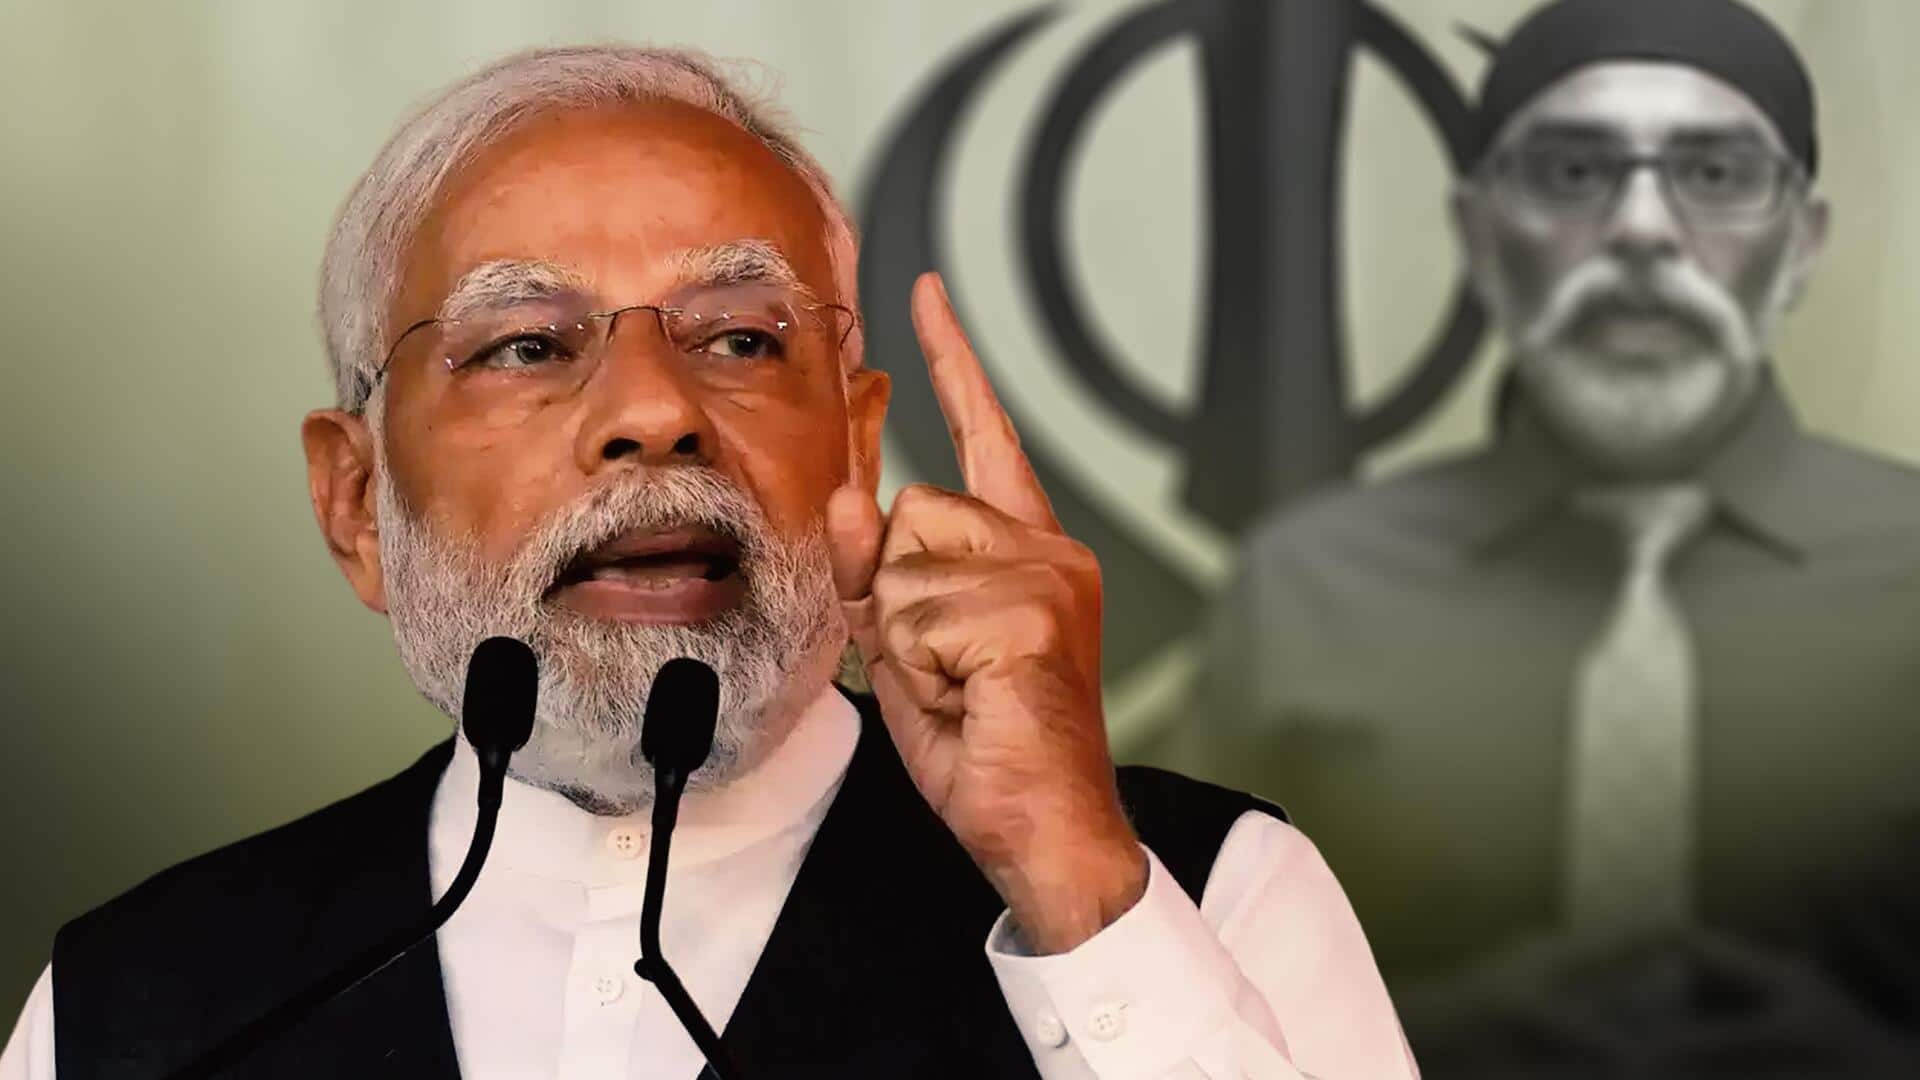 Committed to law: PM Modi on Pannun assassination plot allegations